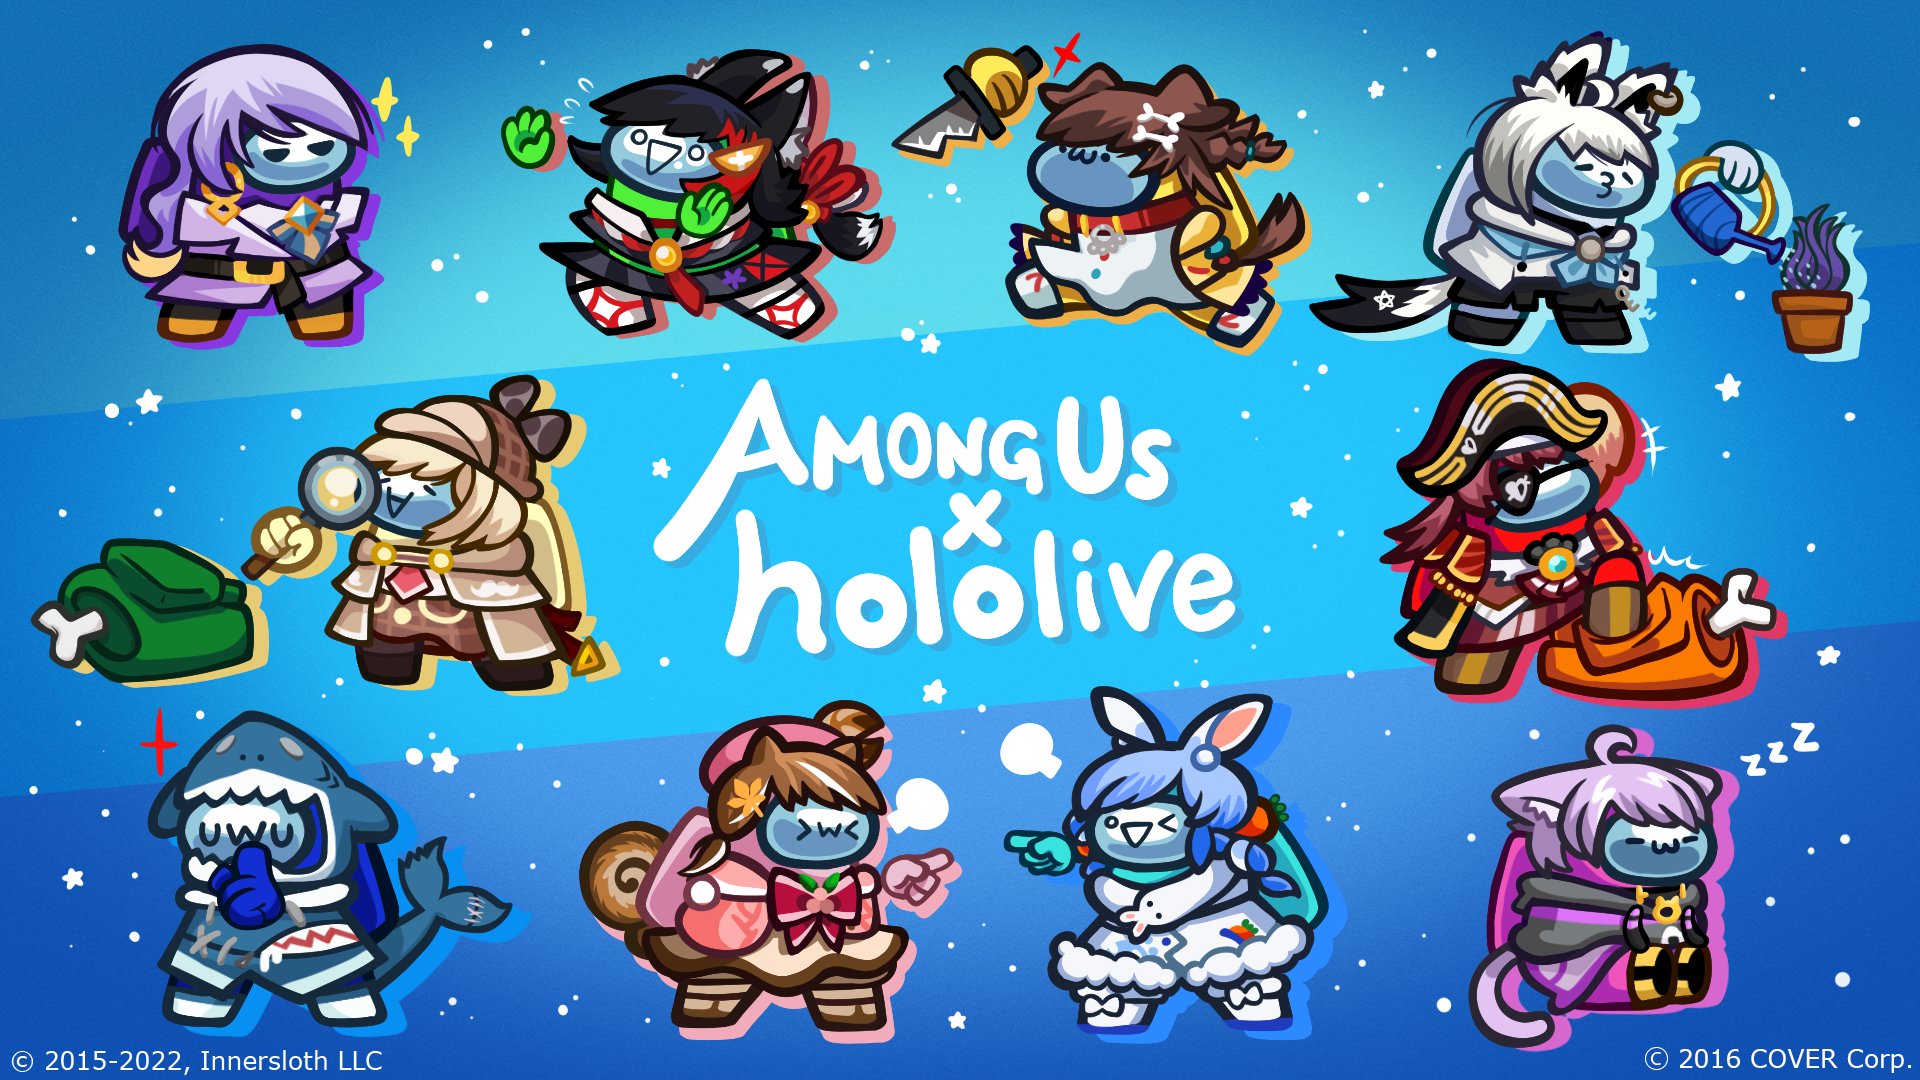 ‘Among Us’ Hololive Collaboration Featuring Cosmetics Based on VTubers Korone, Marine, and More Now Available for a Limited Time